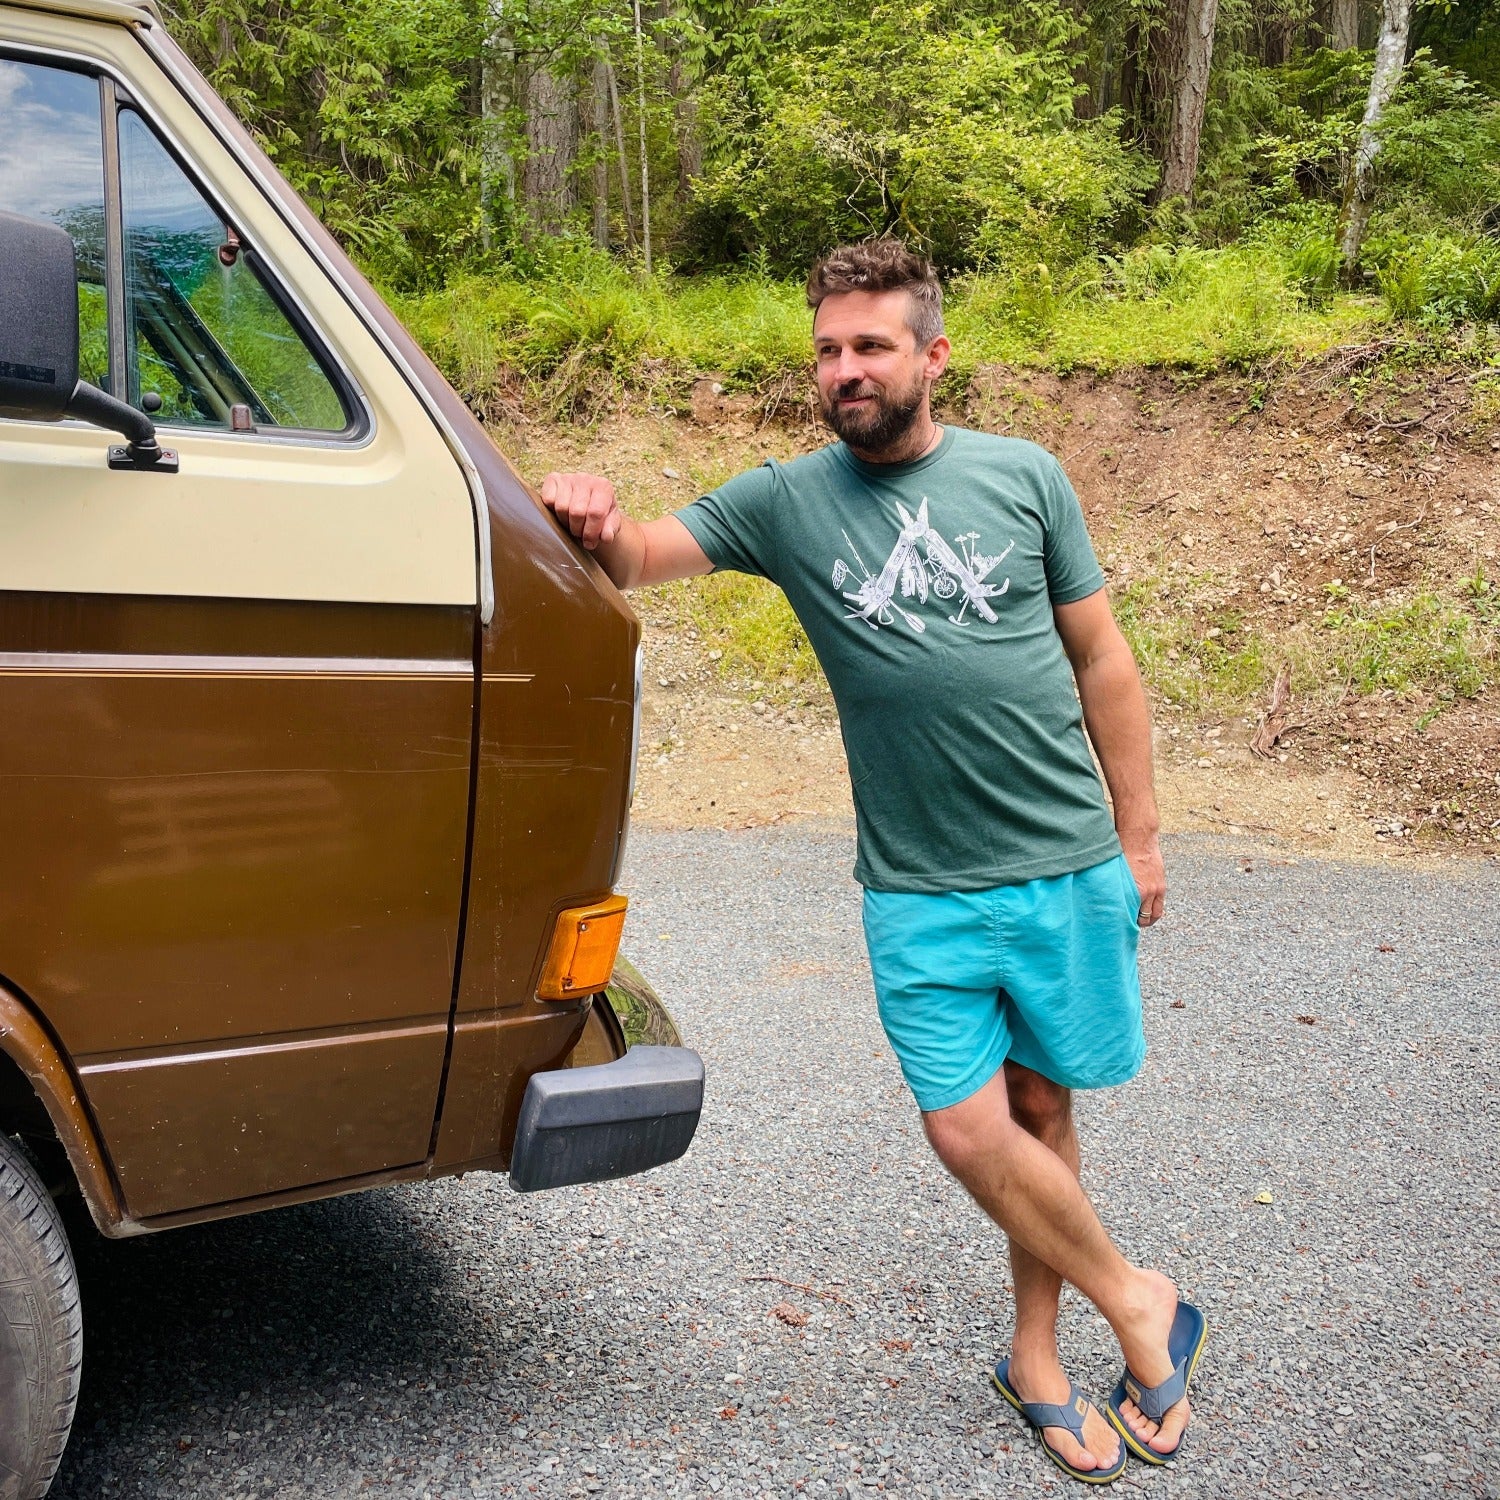 man wearing lighter green t-shirt with a white print of a multitool. The tools within the multitool are actually adventuring items- kayak, fishing pole, skis, ice axe, etc etc.